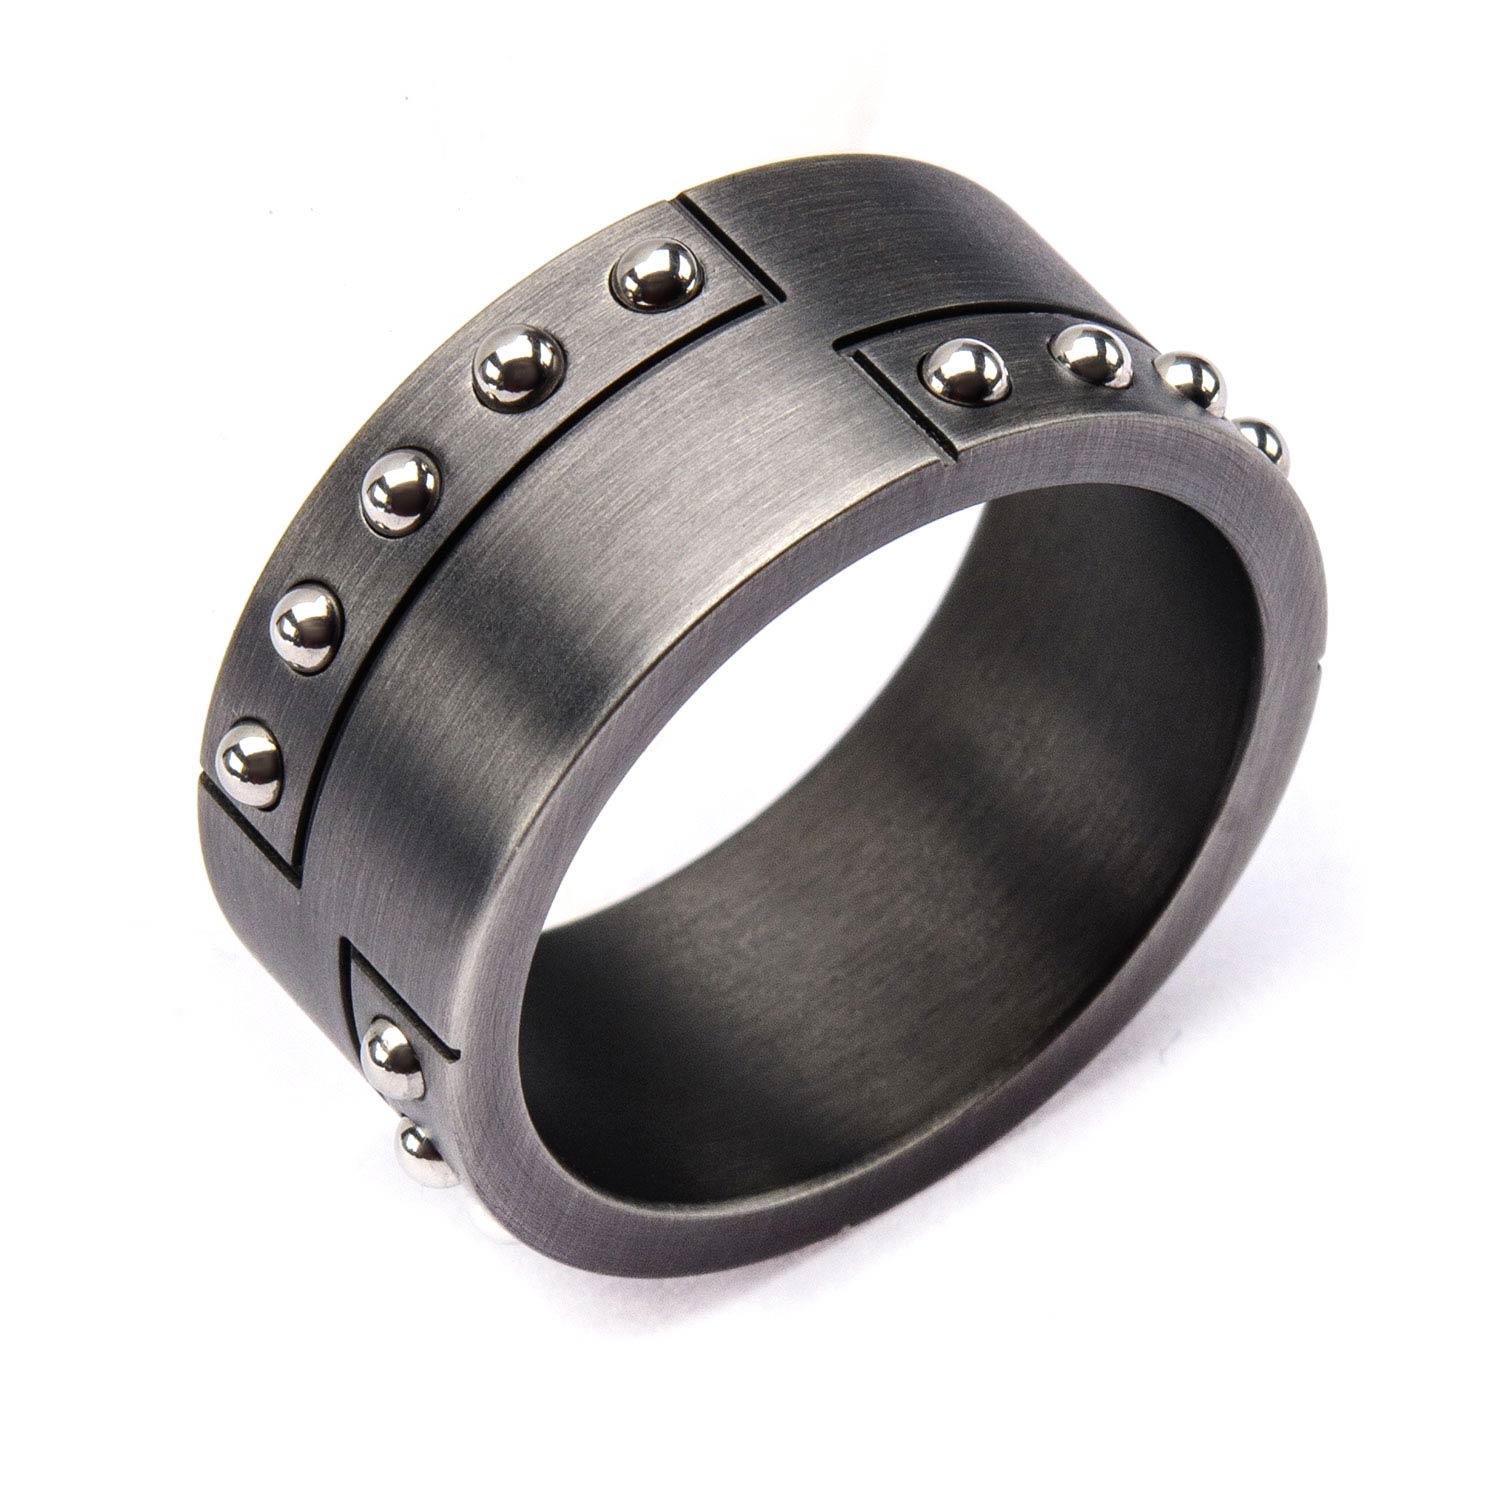 Stainless Steel Gun Metal Finish with Steel Beaded Ring Lewis Jewelers, Inc. Ansonia, CT